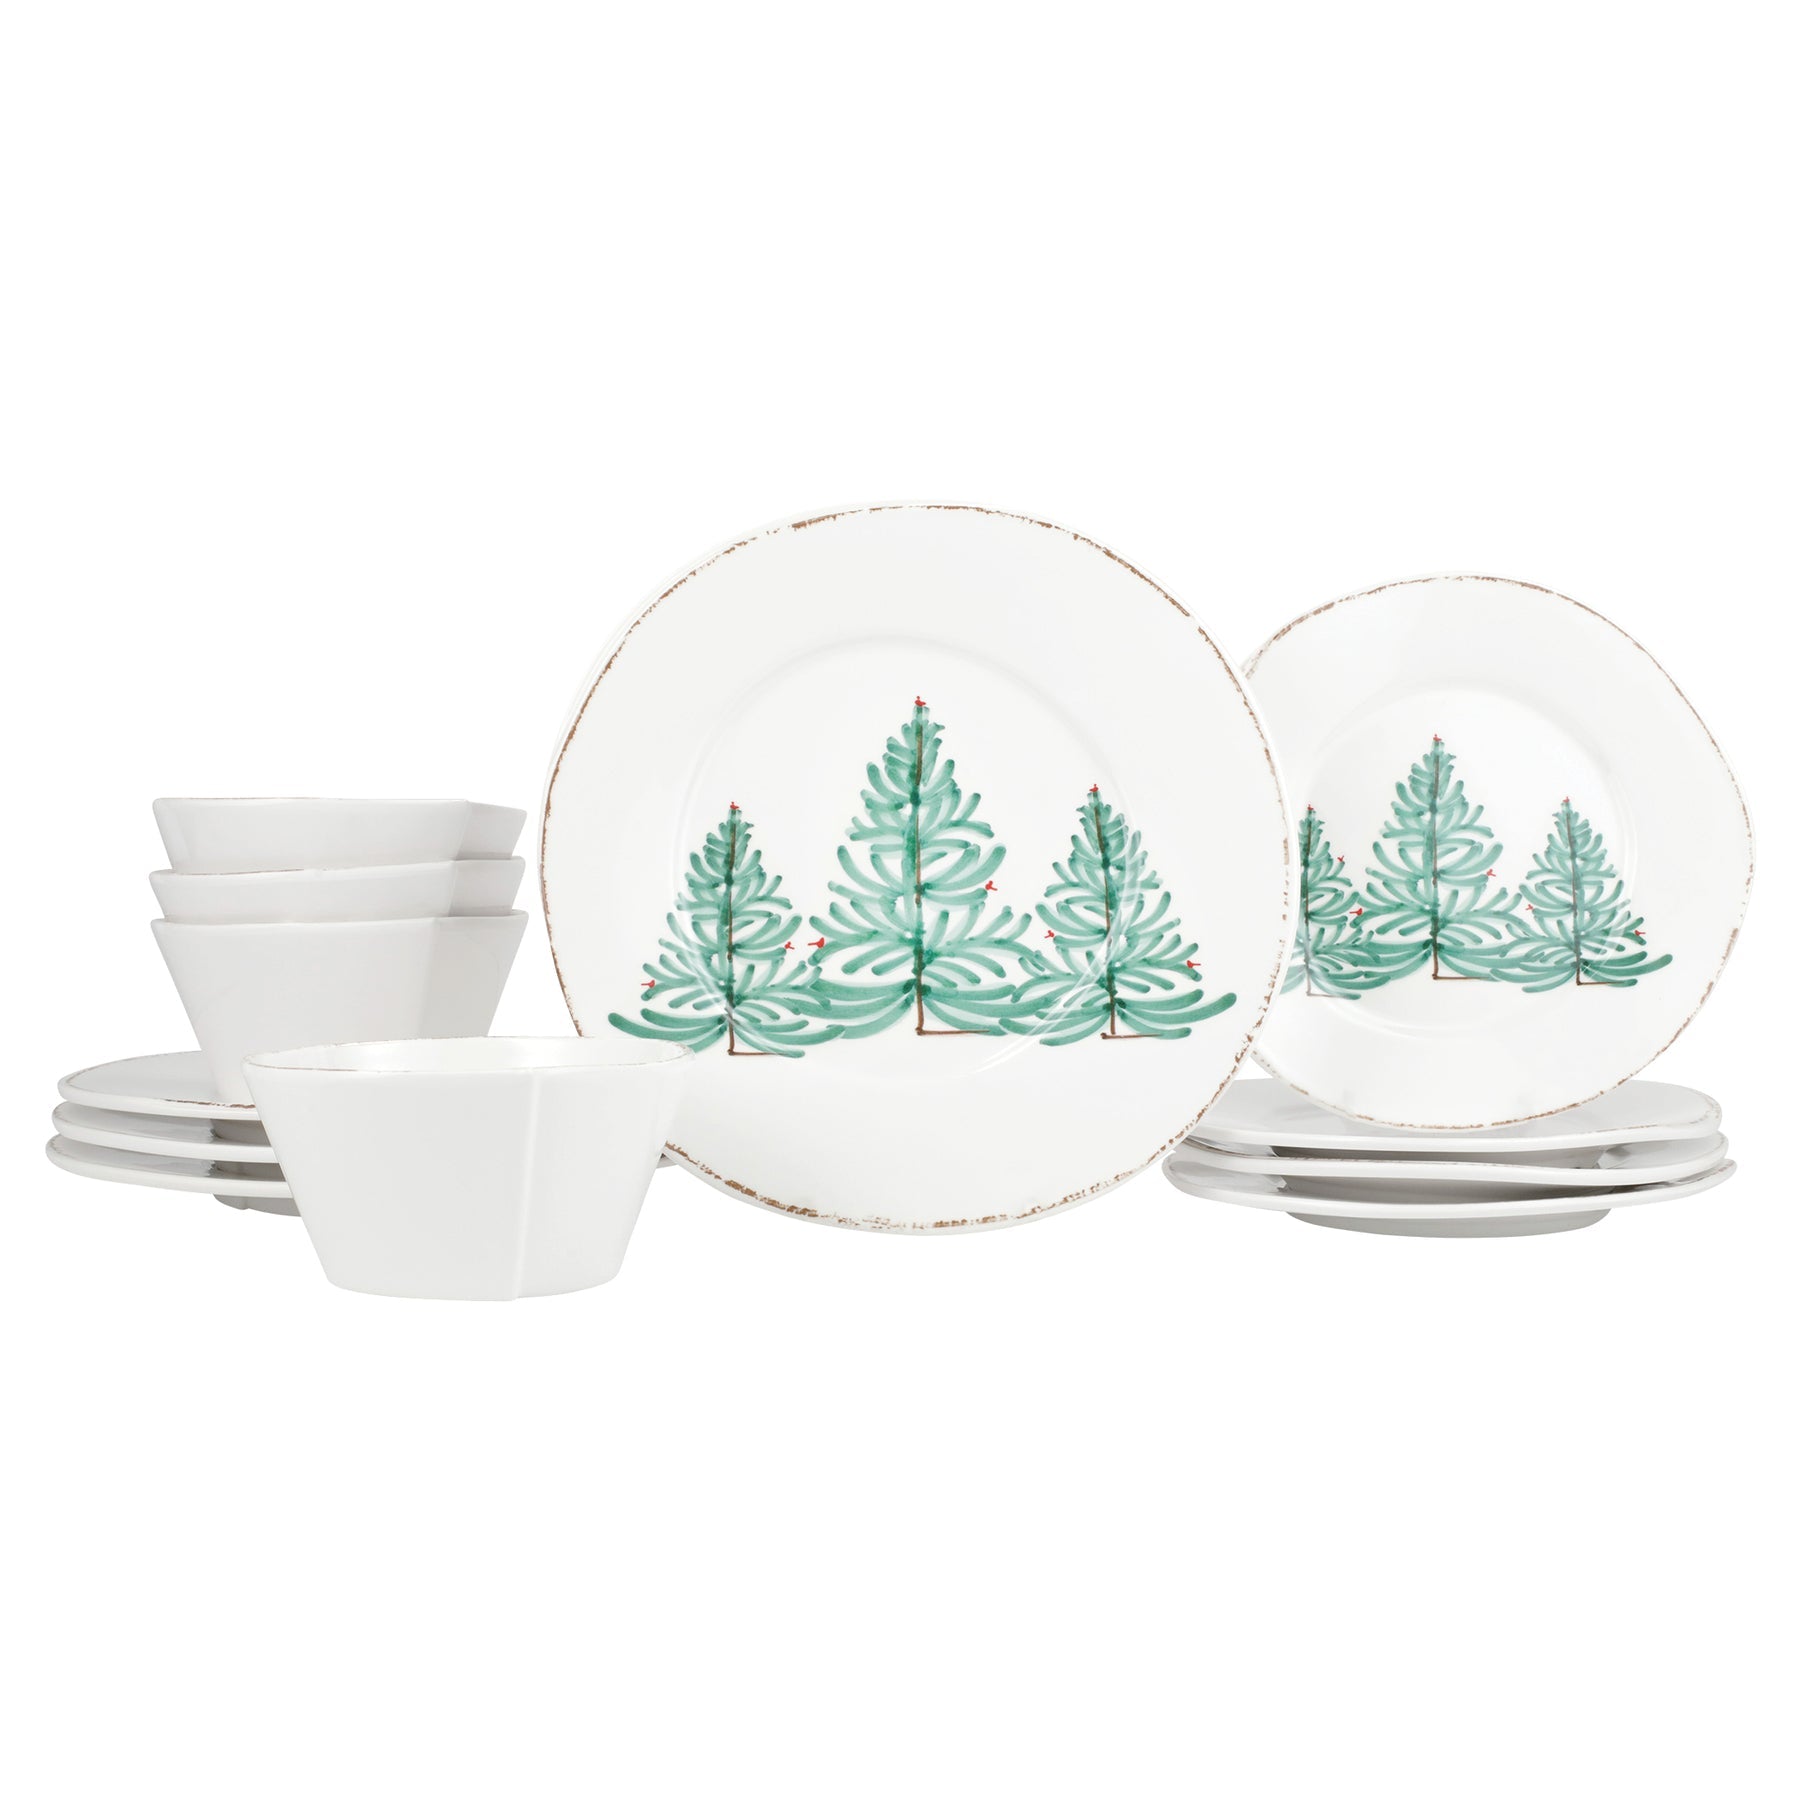 Melamine Lastra Holiday Twelve-Piece Place Setting-Nautical Decor and Gifts